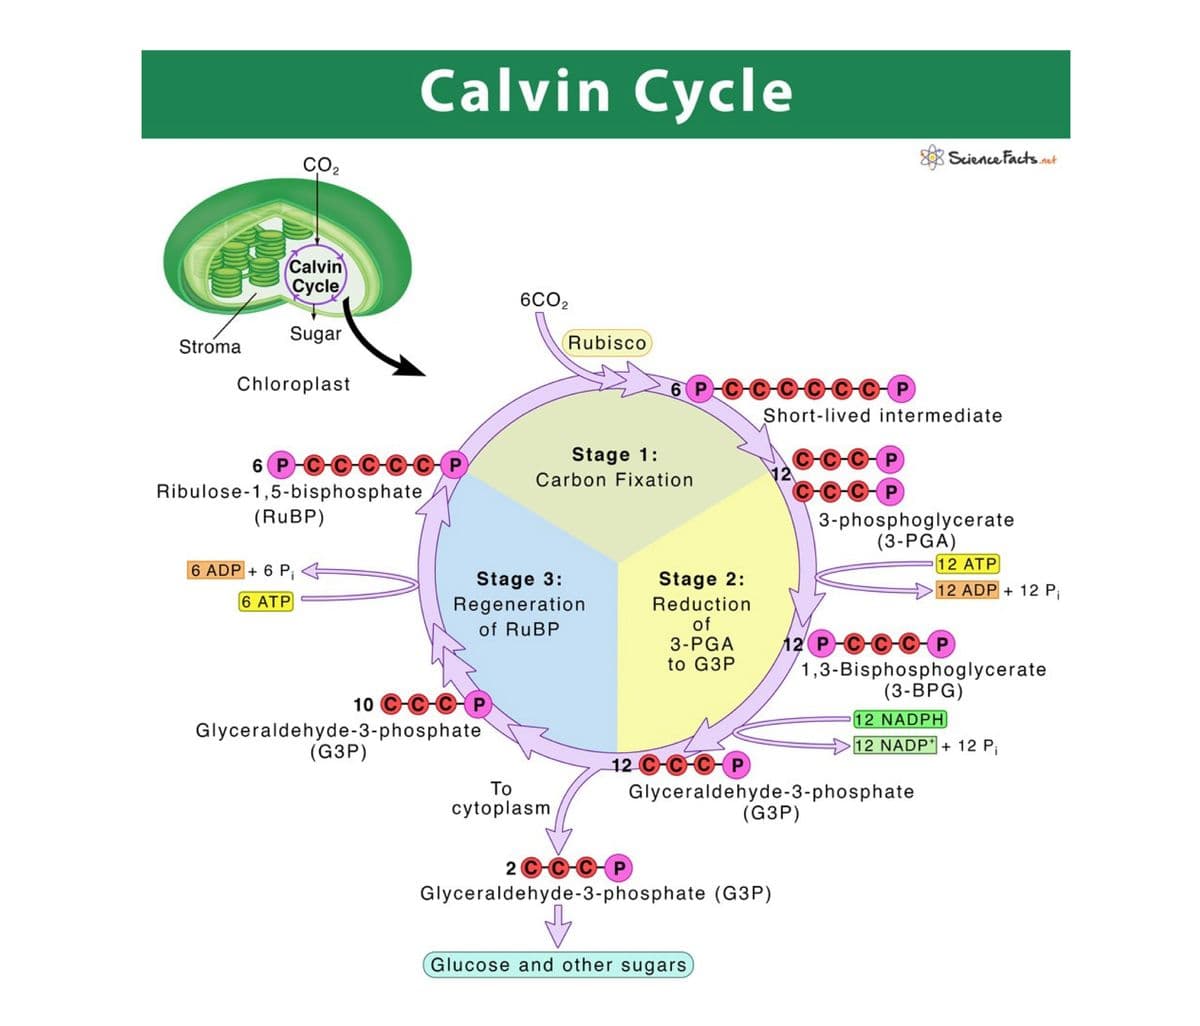 Calvin Cycle
co,
Science Facts.nut
Calvin
Cycle
6CO2
Sugar
Stroma
Rubisco
Chloroplast
O-CC P
Short-lived intermediate
Stage 1:
6 P-CC C-CC P
Ribulose-1,5-bisphosphate
Carbon Fixation
12
(RUBP)
3-phosphoglycerate
(3-PGA)
12 ATP
12 ADP + 12 P;
6 ADP + 6 P;
Stage 3:
Regeneration
of RUBP
Stage 2:
Reduction
of
3-PGA
to G3P
6 ATP
12 P-C-C-C P
1,3-Bisphosphoglycerate
(3-BPG)
10 C-C-C P
12 NADPH
12 NADP + 12 P;
Glyceraldehyde-3-phosphate
(G3P)
12 C-C-CP
To
Glyceraldehyde-3-phosphate
(G3P)
cytoplasm
2 C C-C-P
Glyceraldehyde-3-phosphate (G3P)
Glucose and other sugars
